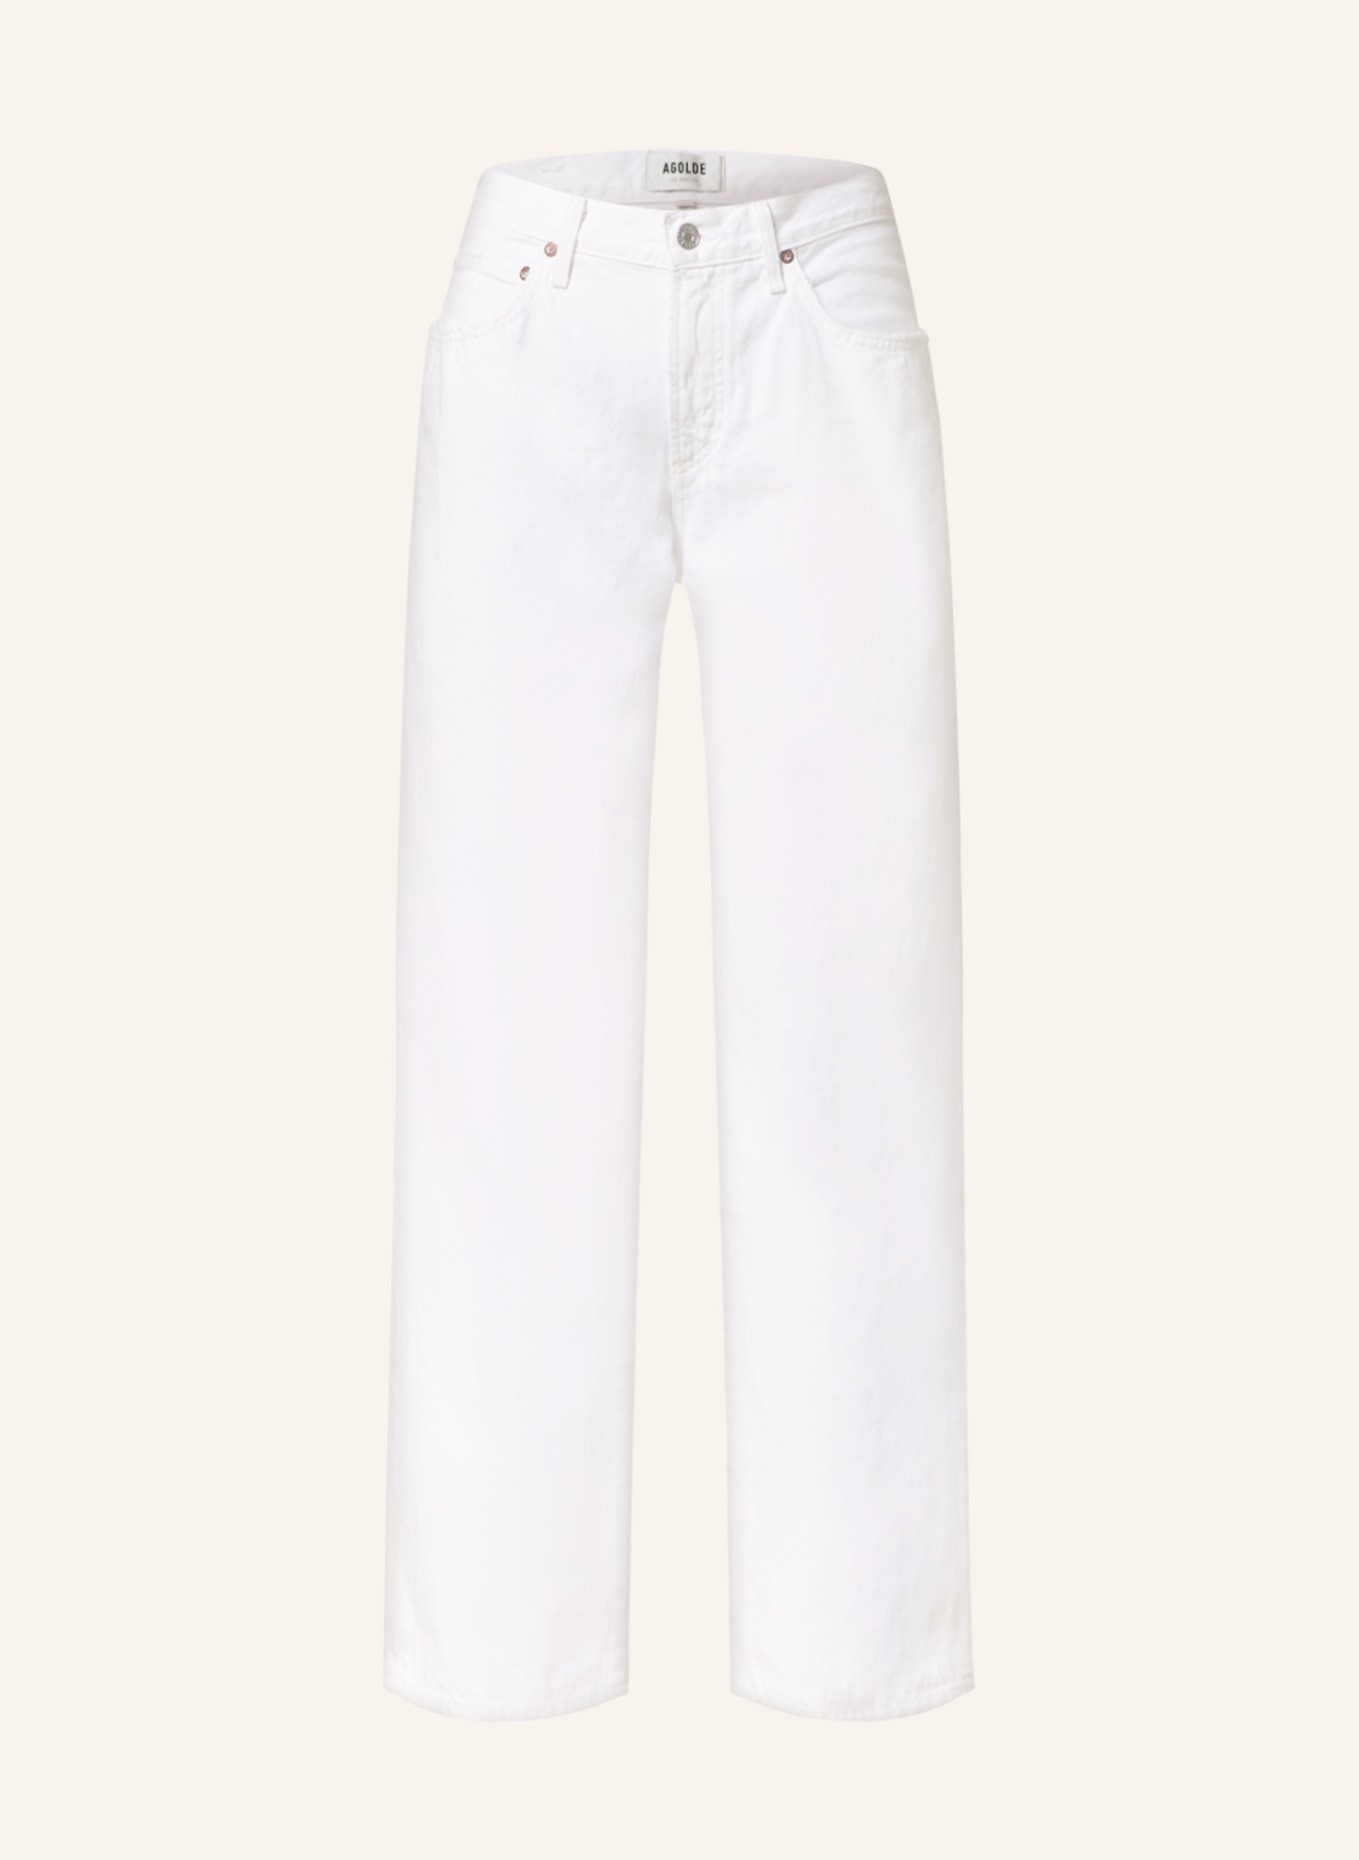 AGOLDE Straight Jeans FUSION, Farbe: WEISS (Bild 1)